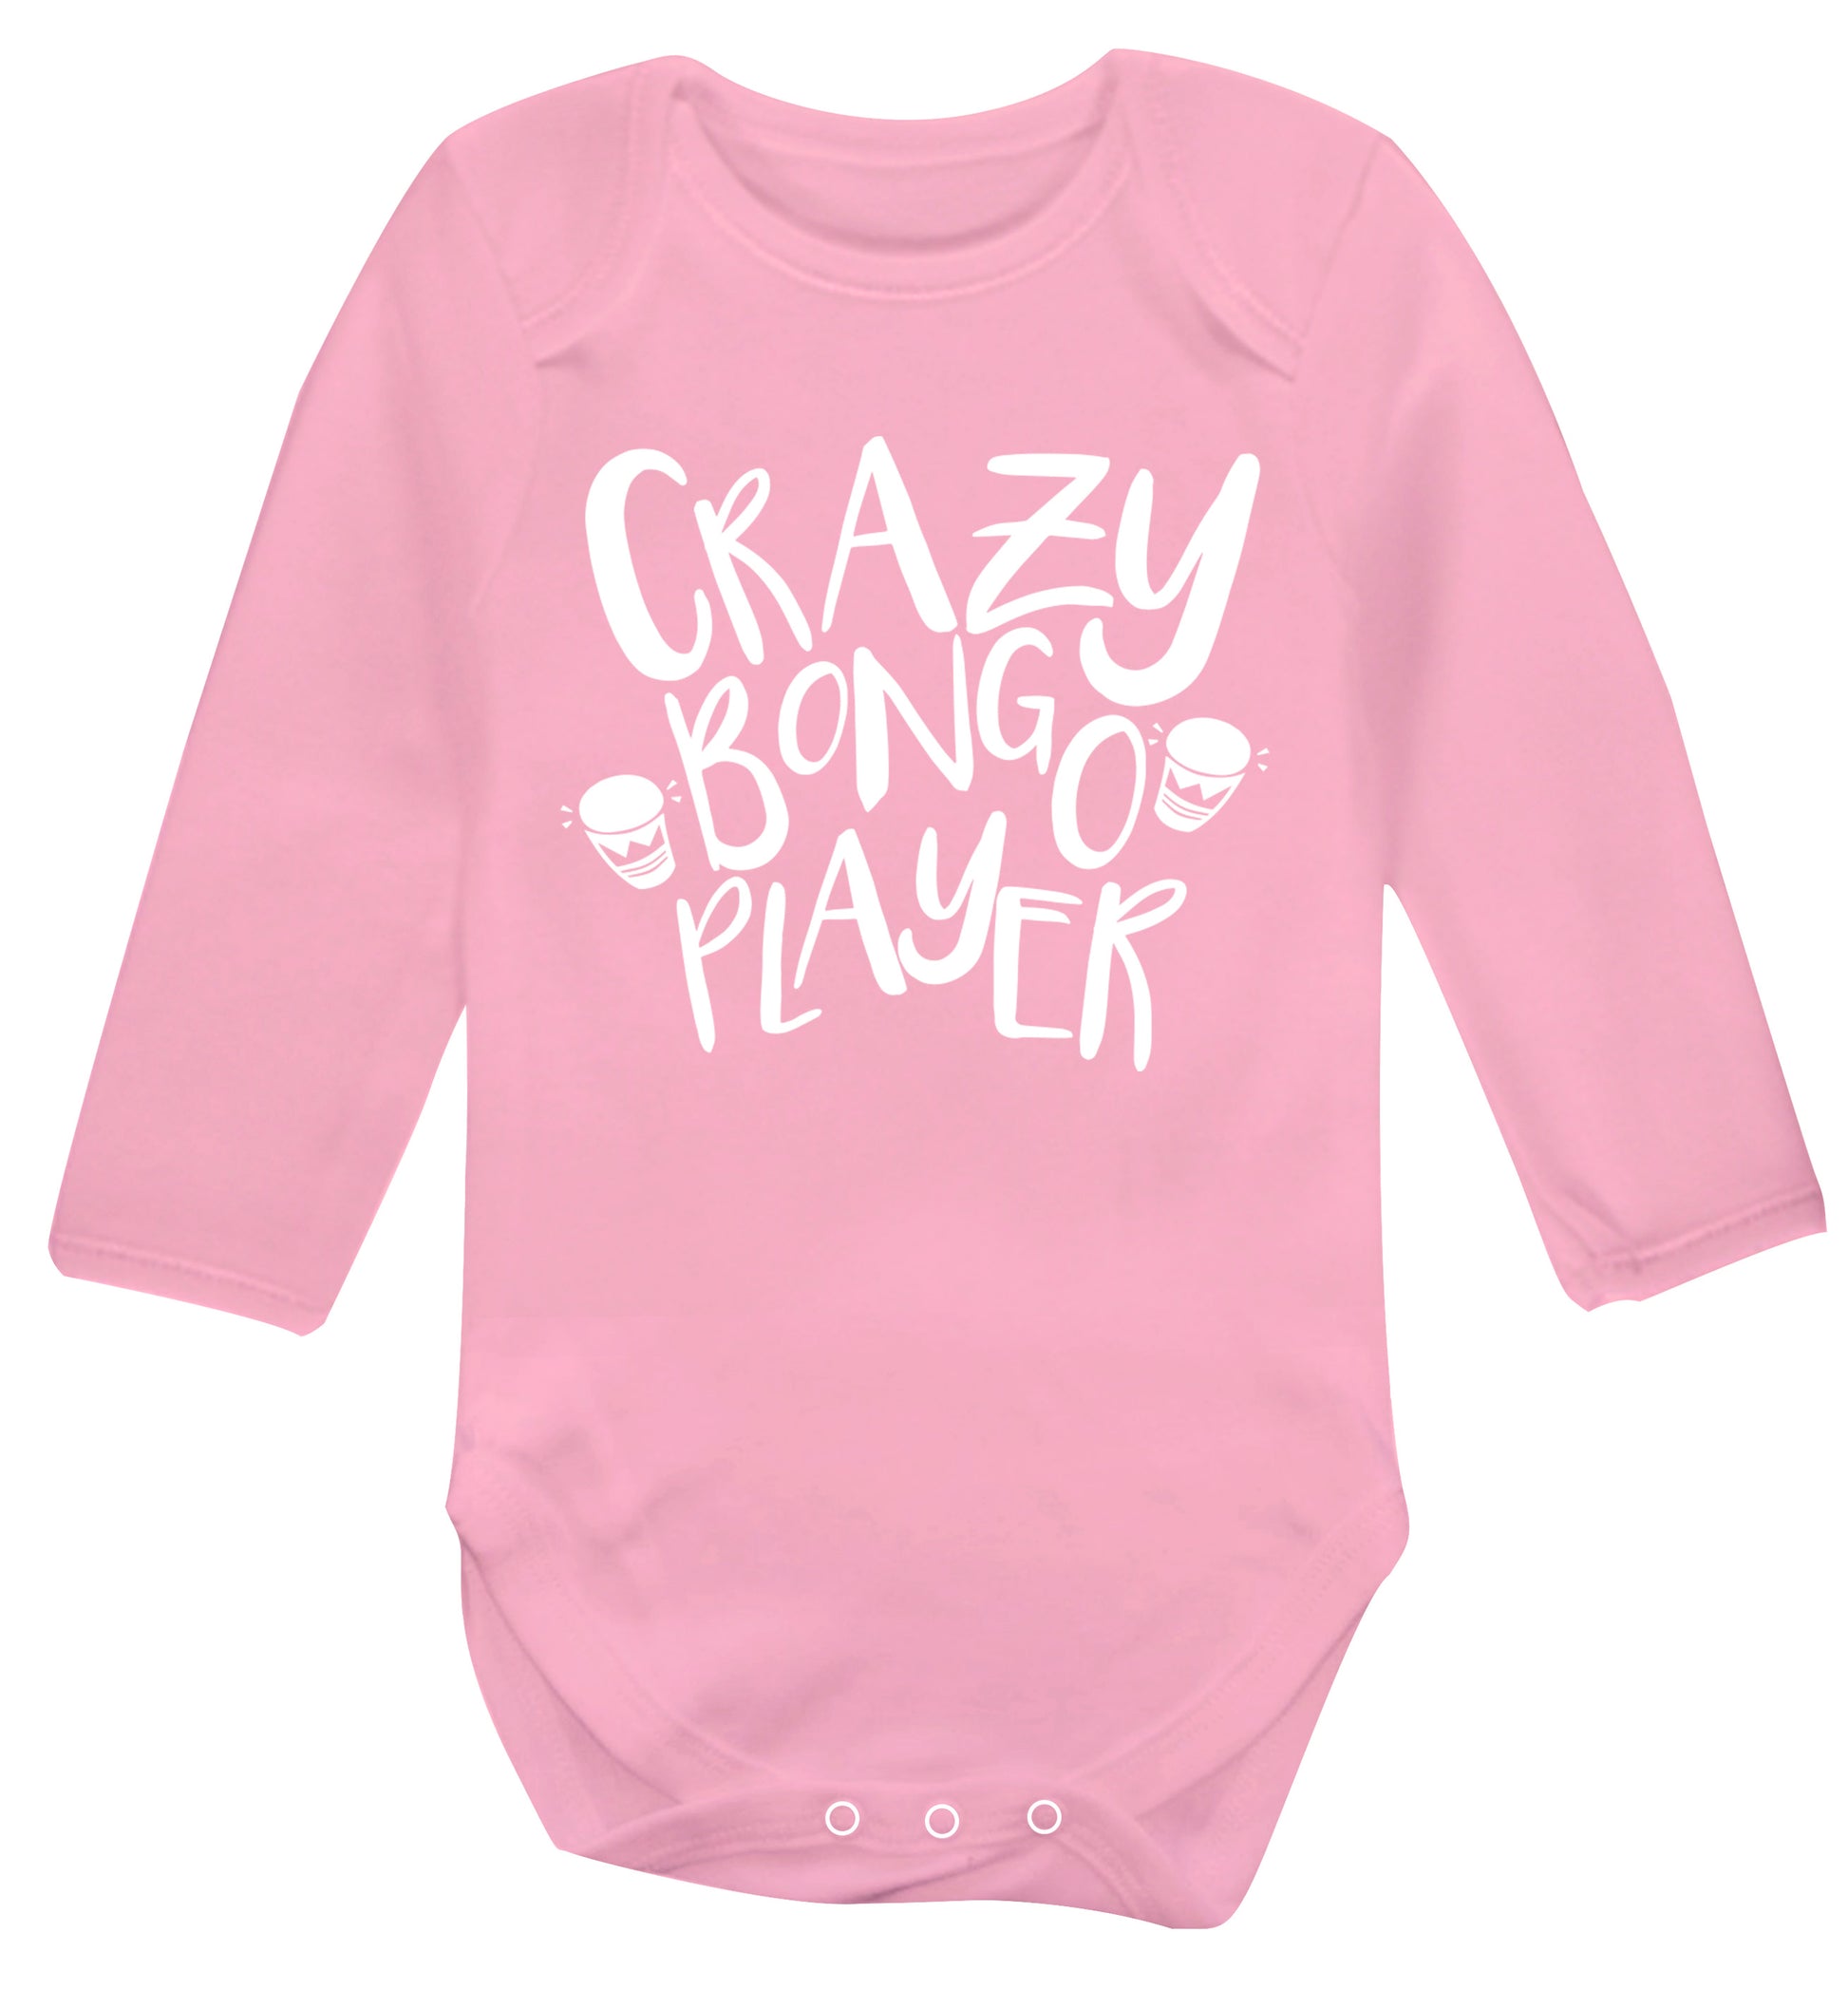 Crazy bongo player Baby Vest long sleeved pale pink 6-12 months